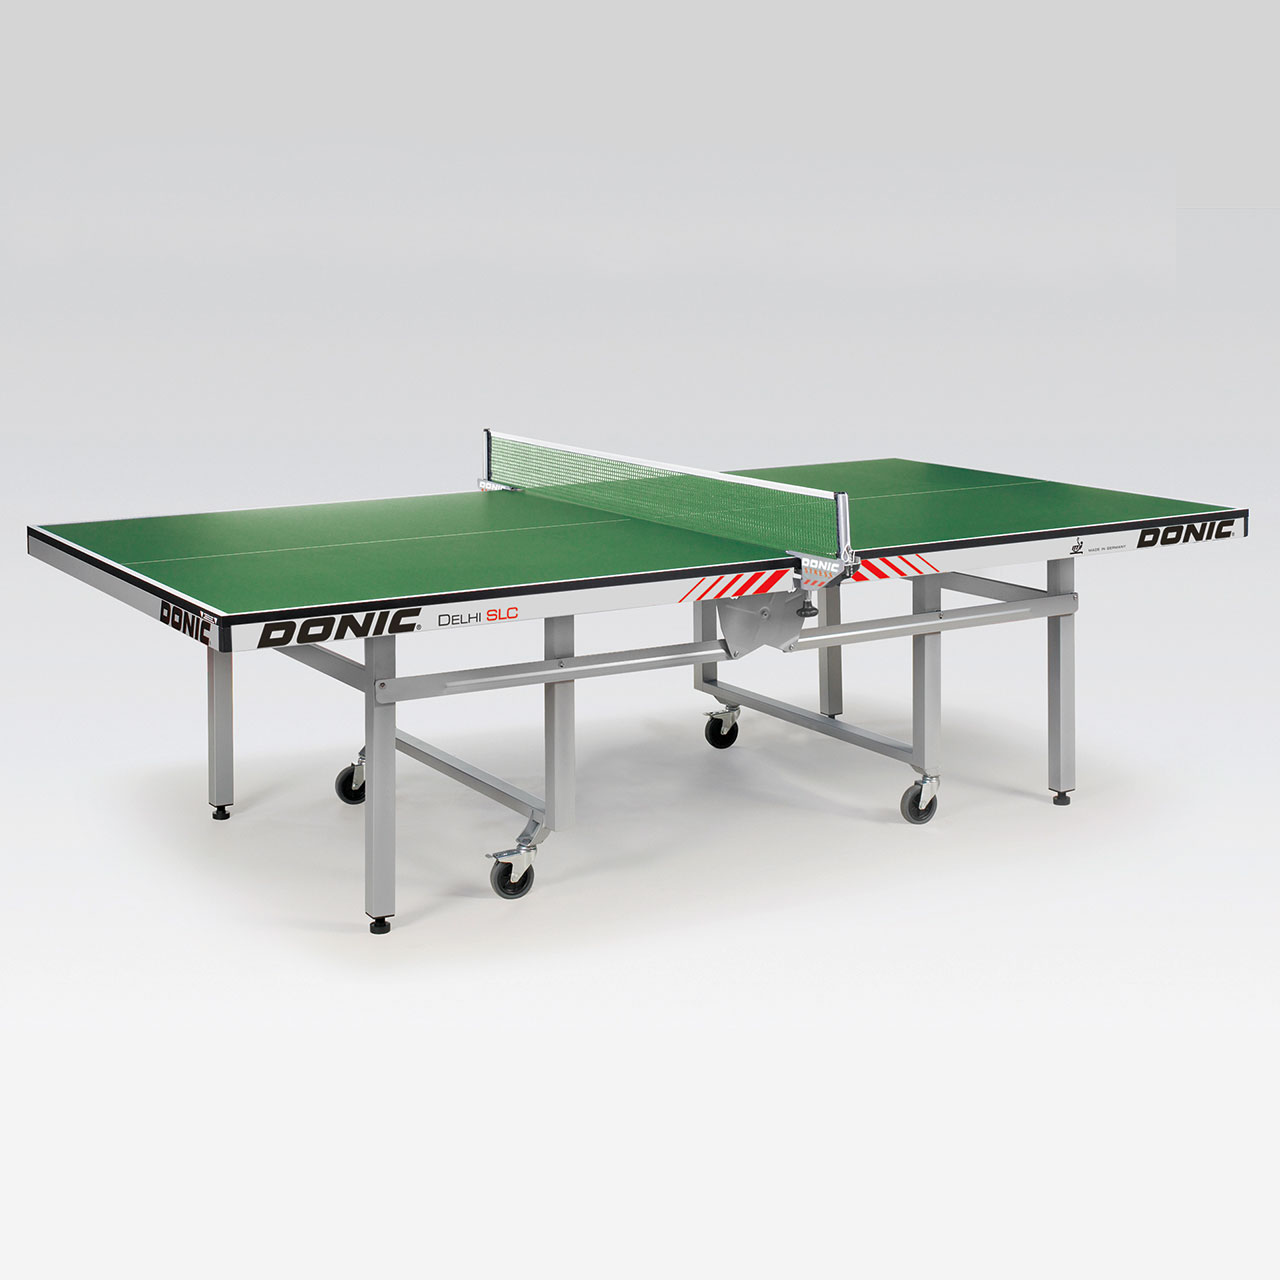 Donic Delhi SLC Table - | Tennis Table Jarvis Sports